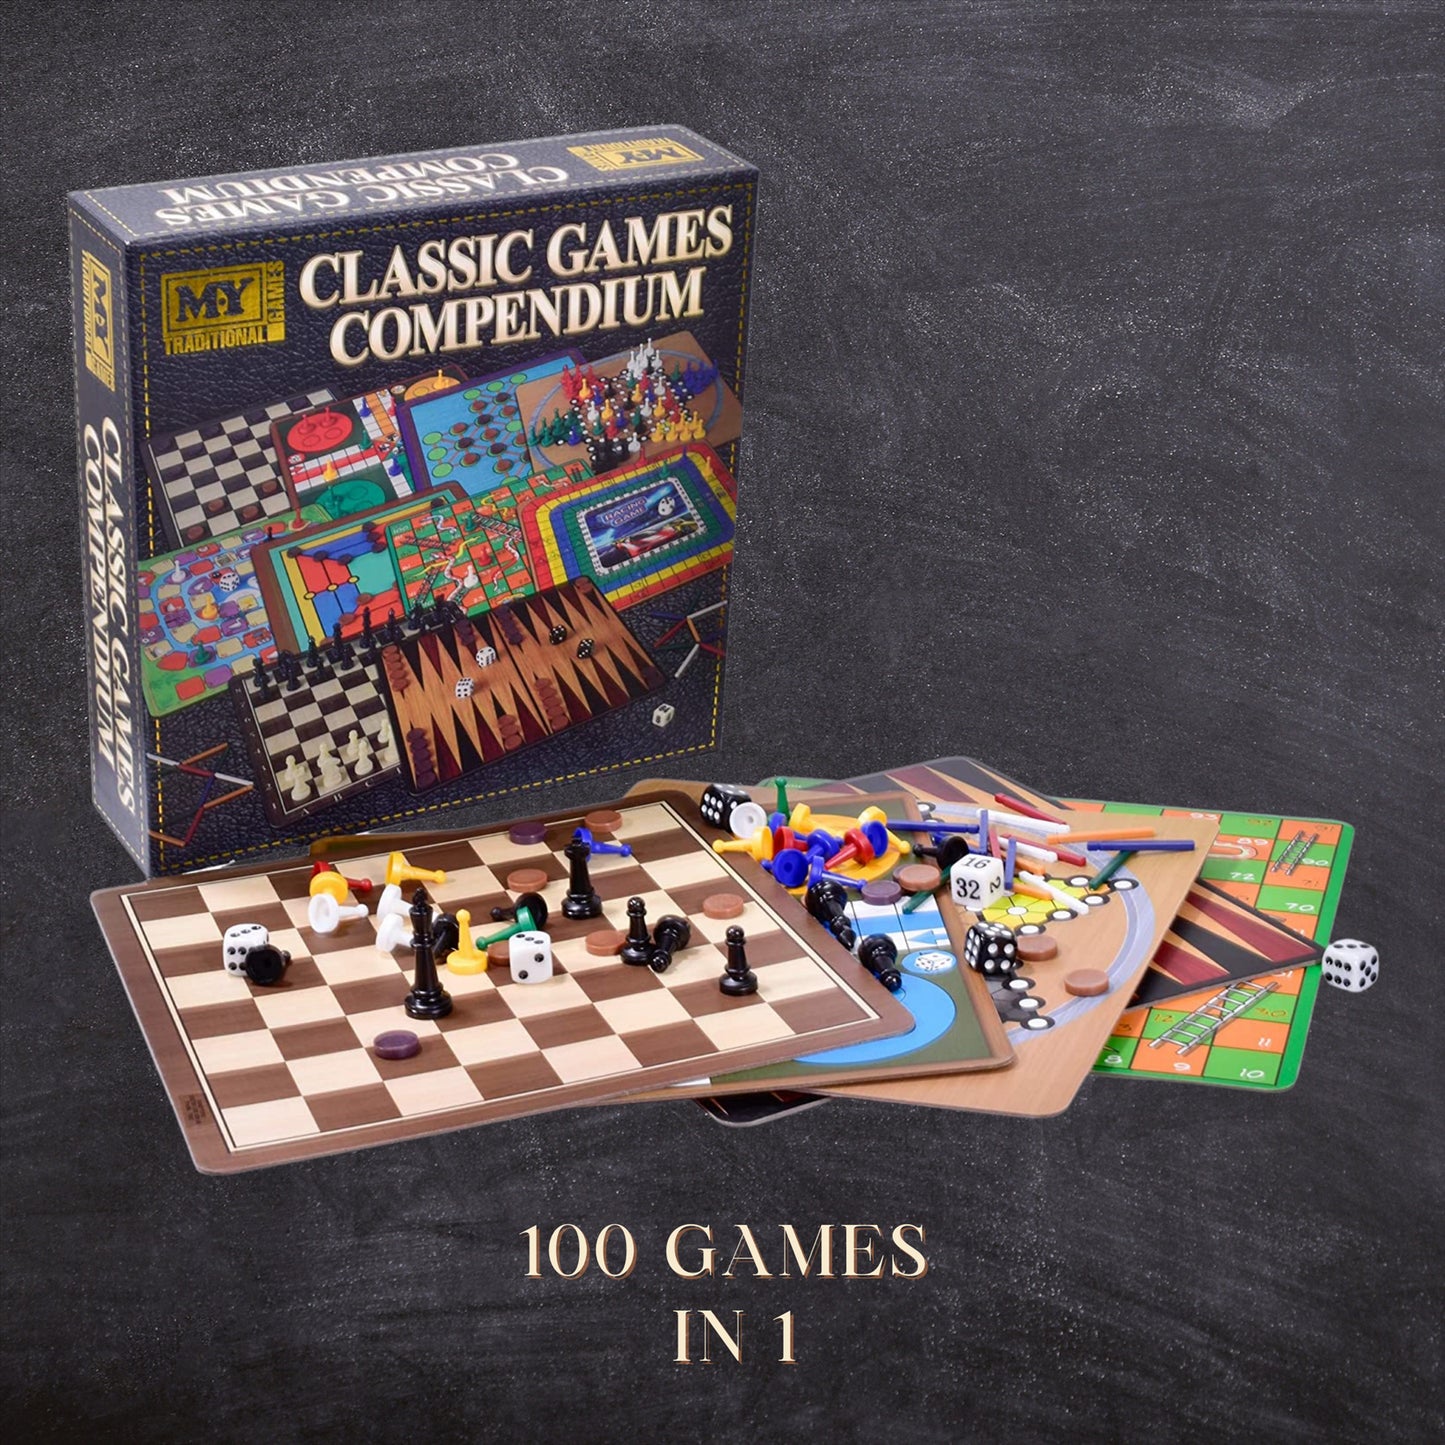 Classic Games Compendium by The Magic Toy Shop - UKBuyZone